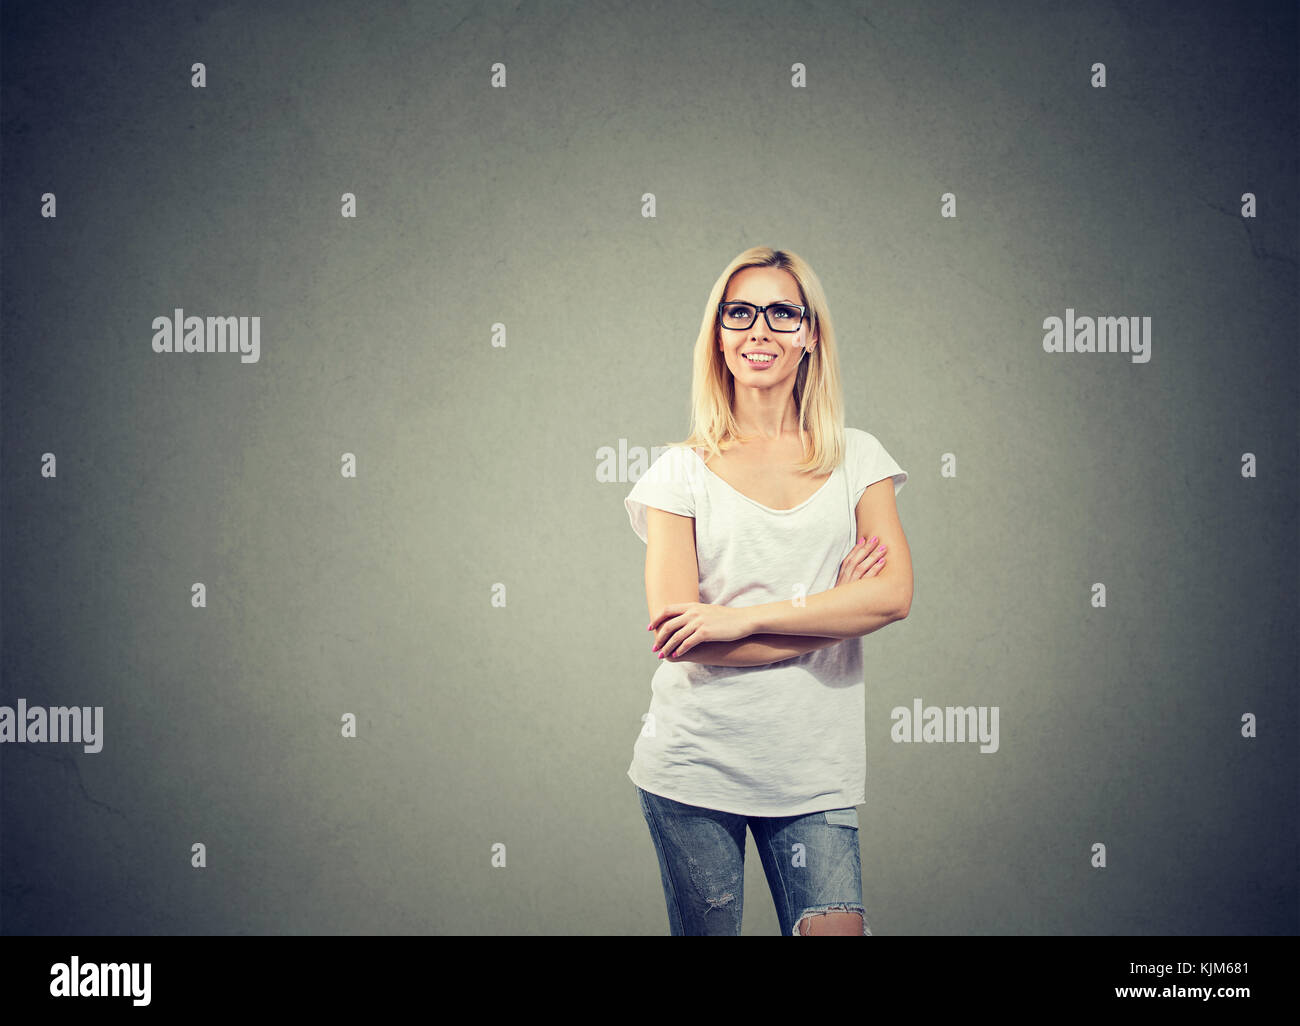 Portrait of happy woman thinking looking up while standing near a concrete wall. Stock Photo